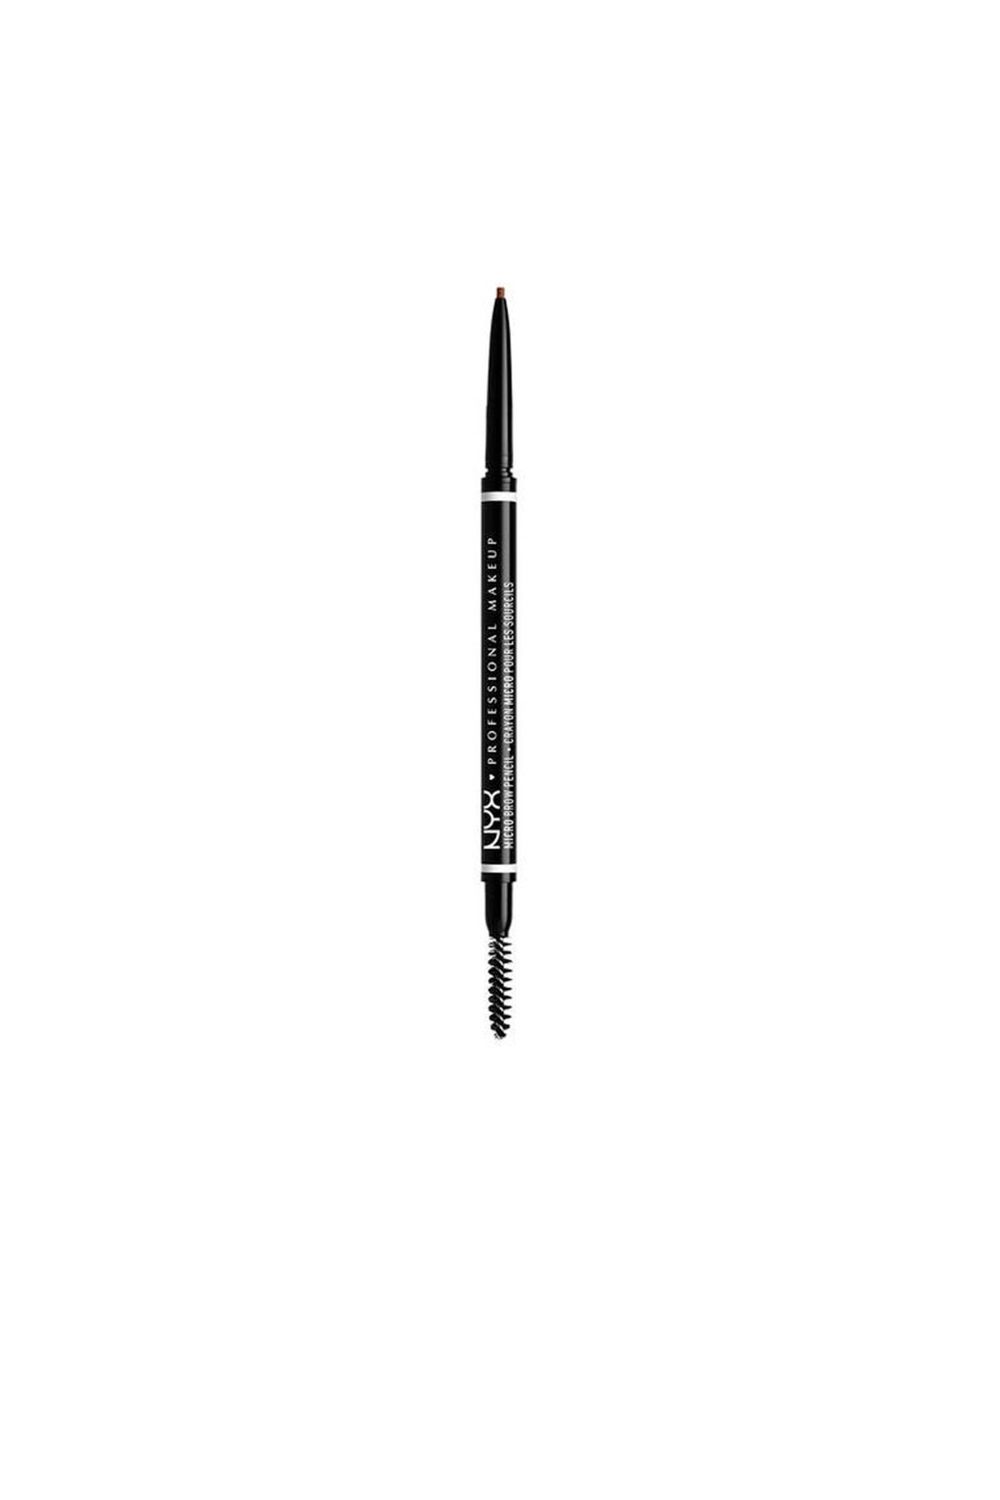 NYX Professional Makeup Micro - Trendyol #brunette Brow Pencil g 0,5